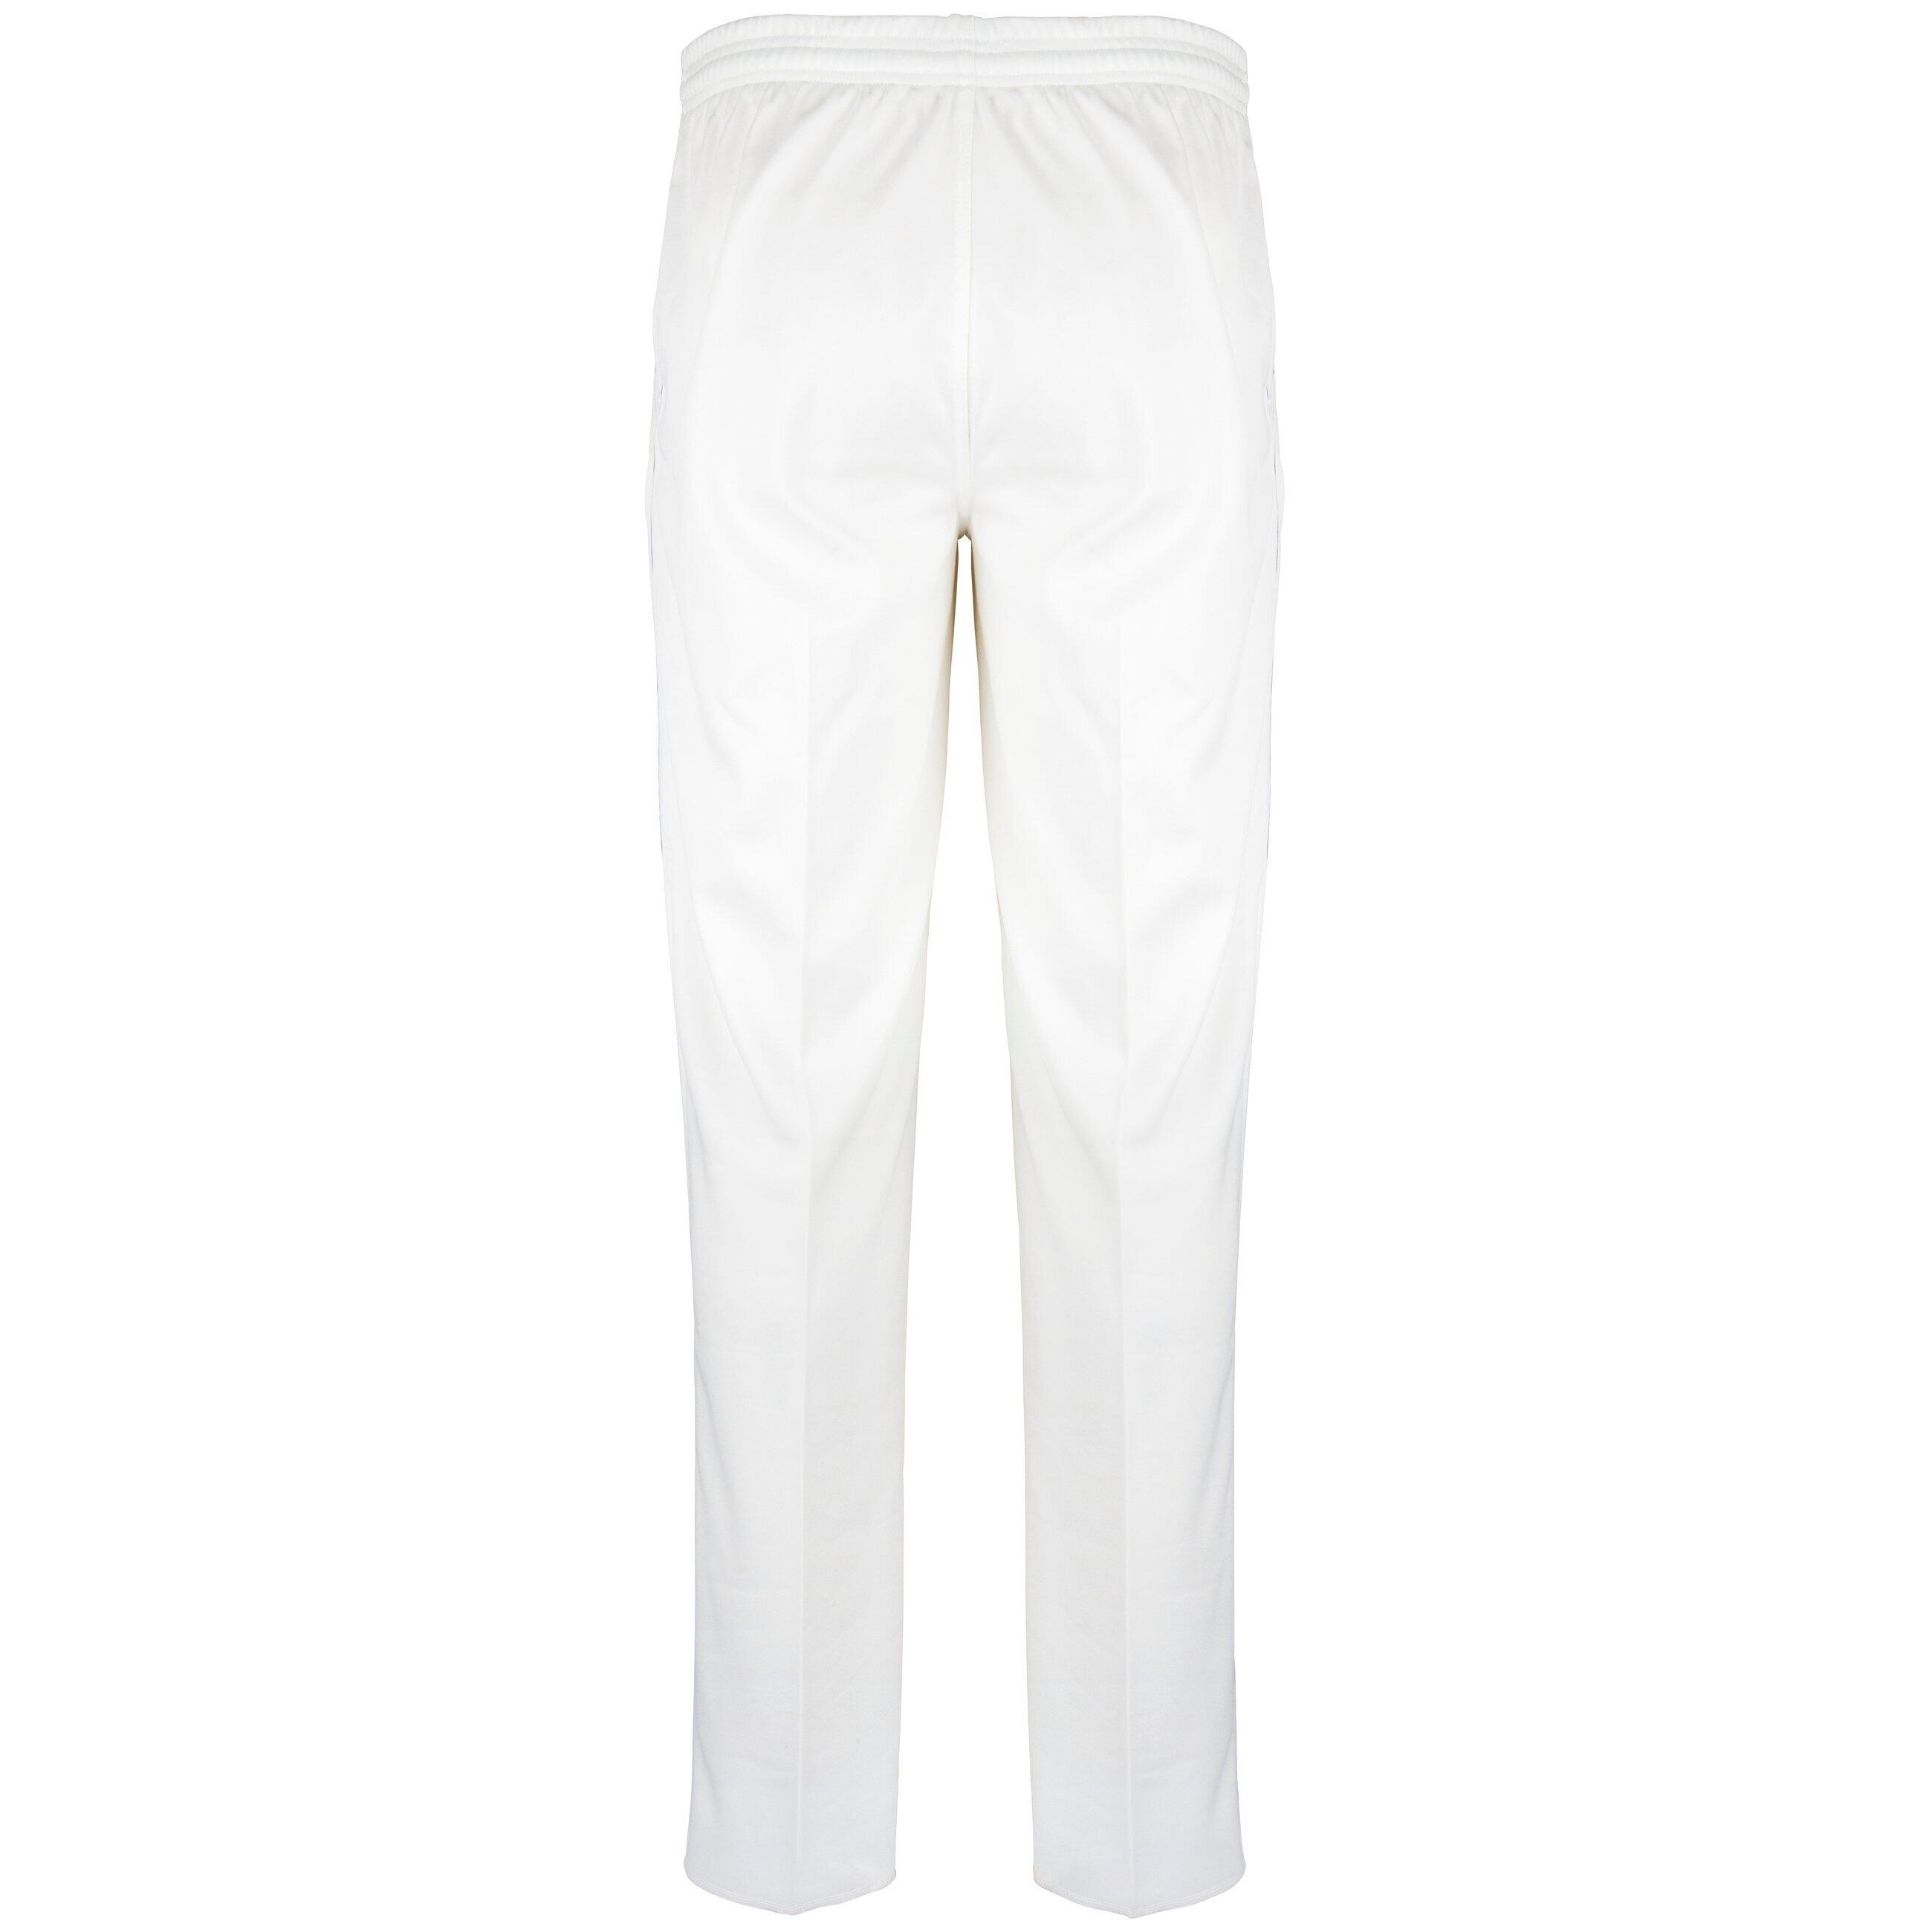 THE ULTIMATE CRICKET TROUSERS BUYING GUIDE  CA Sports Global